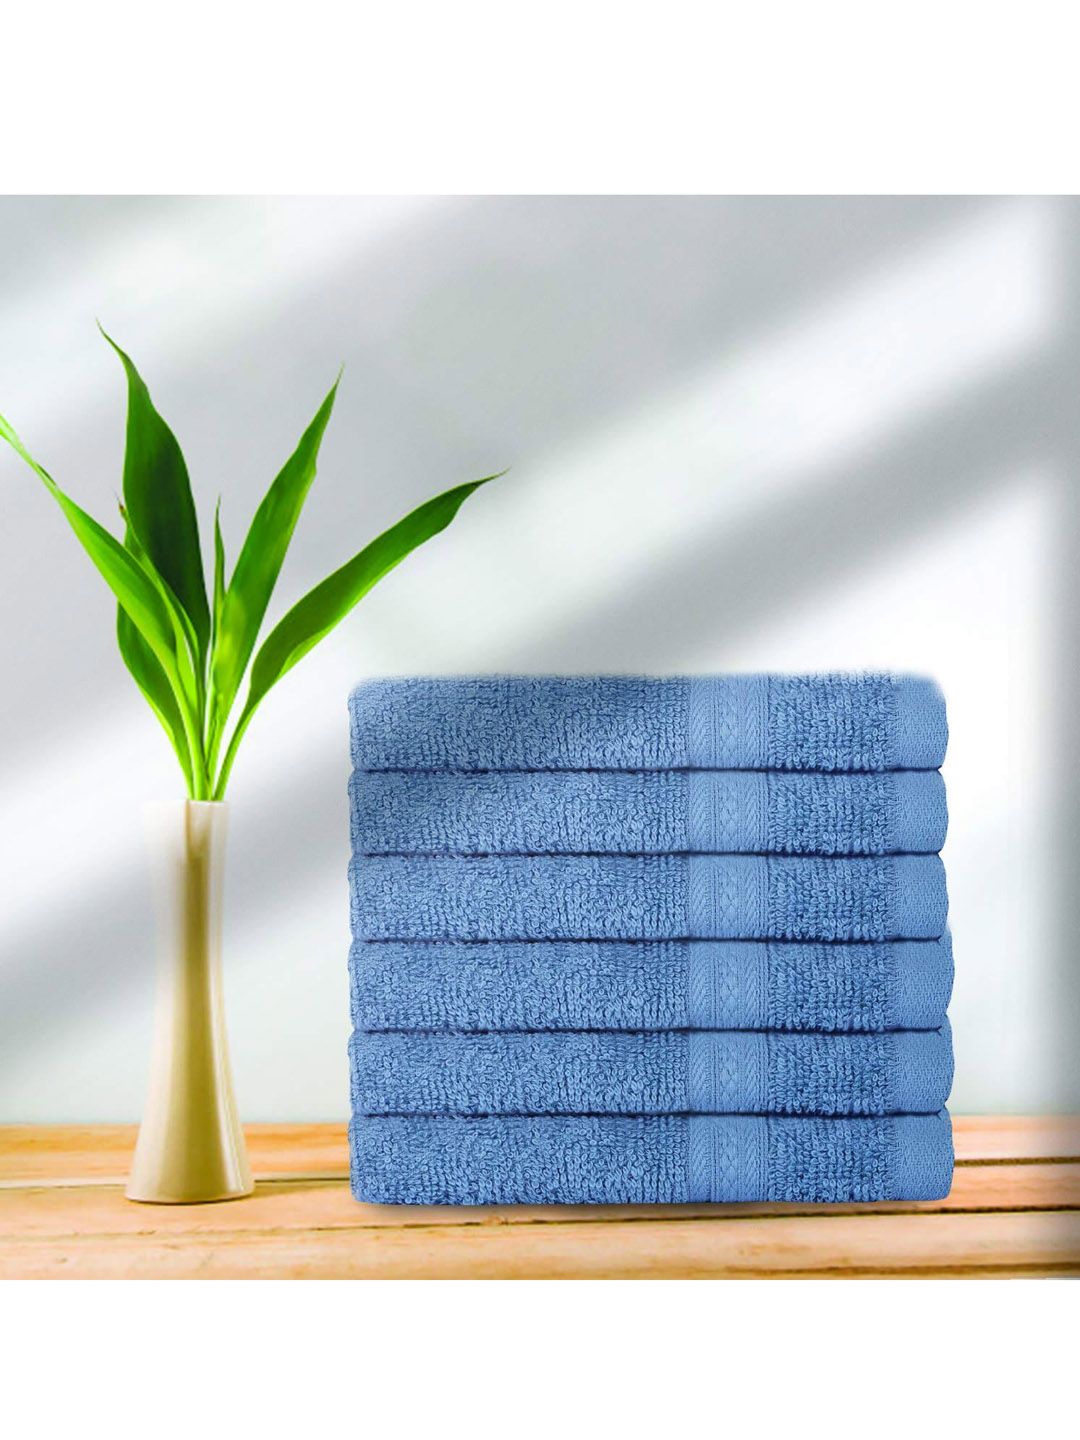 Kawach Unisex Blue Set Of 6 Antimicrobial Bamboo Face Towel Price in India